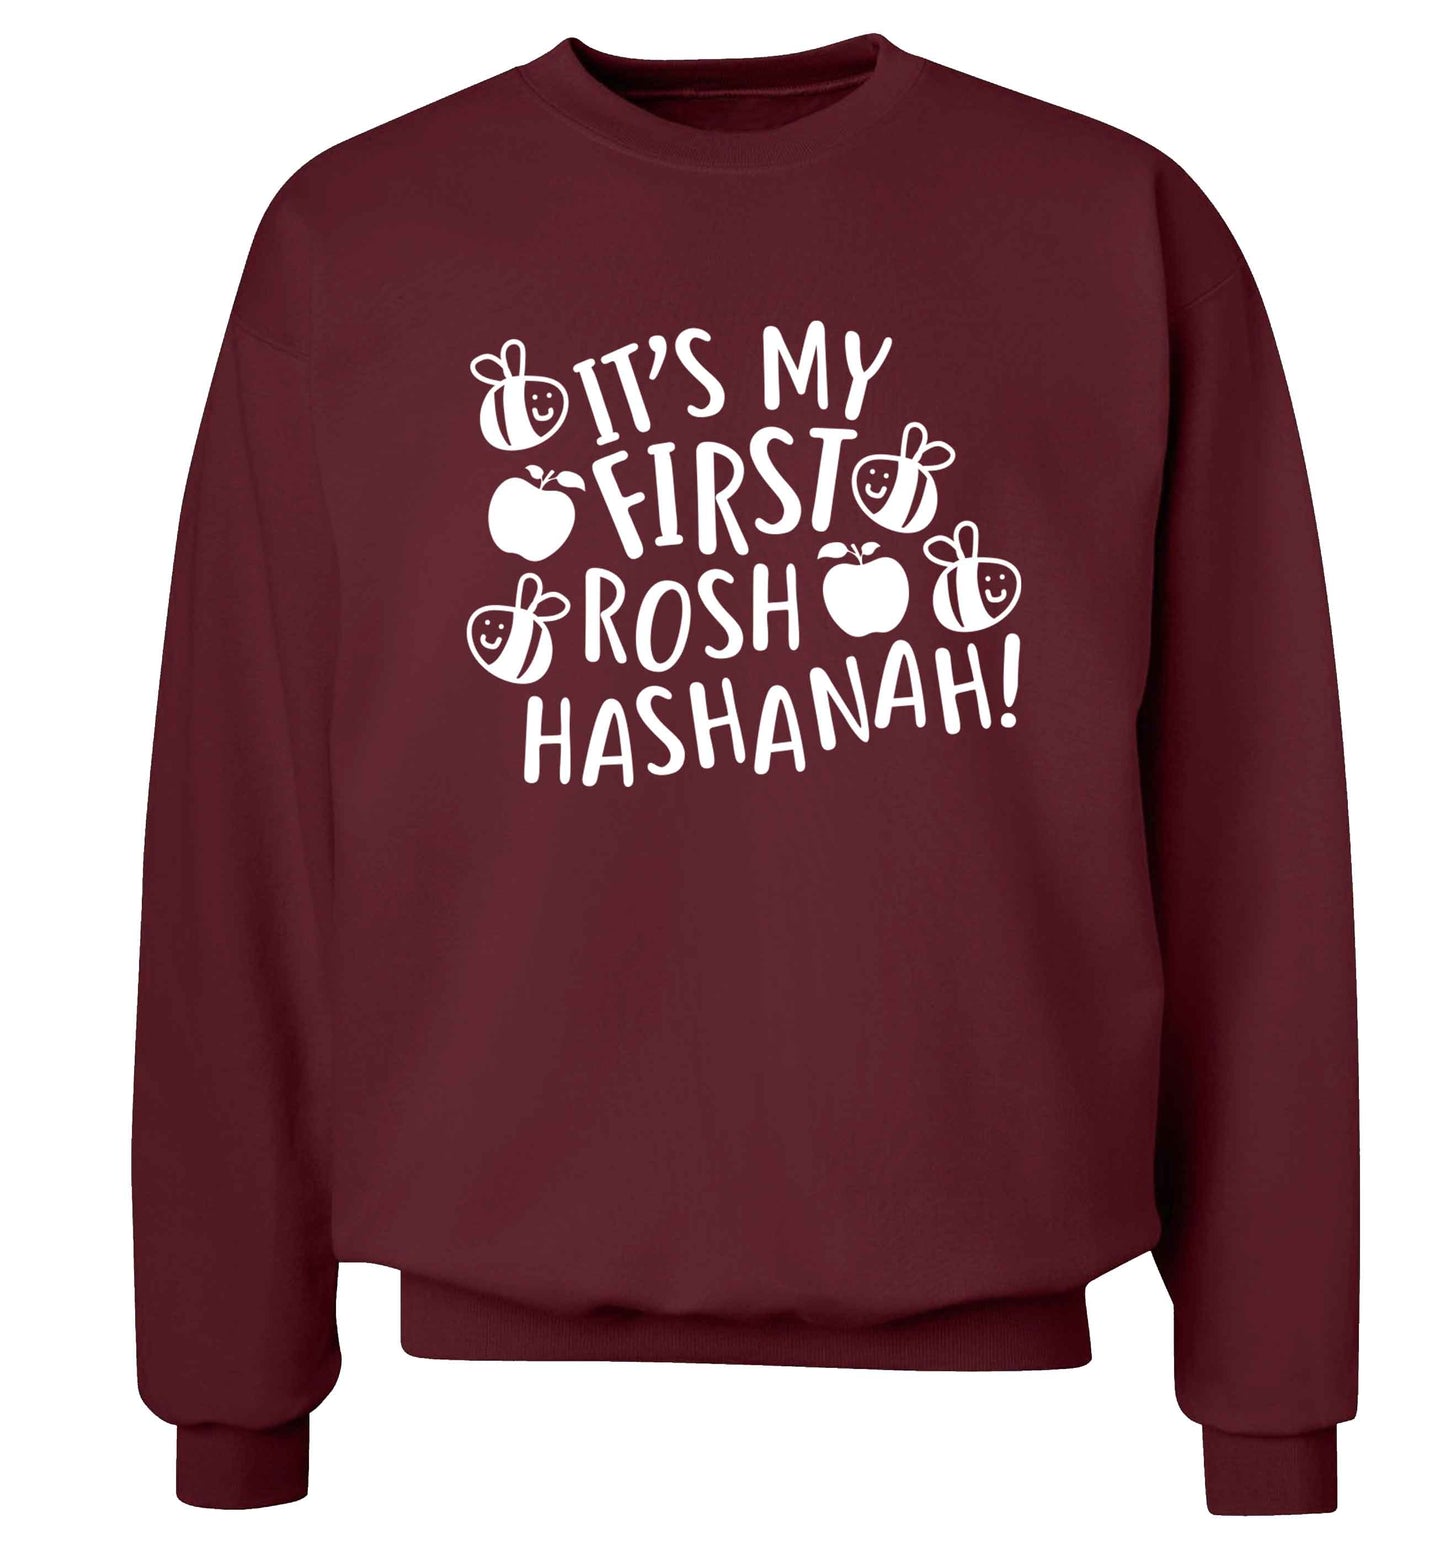 Its my first rosh hashanah Adult's unisex maroon Sweater 2XL